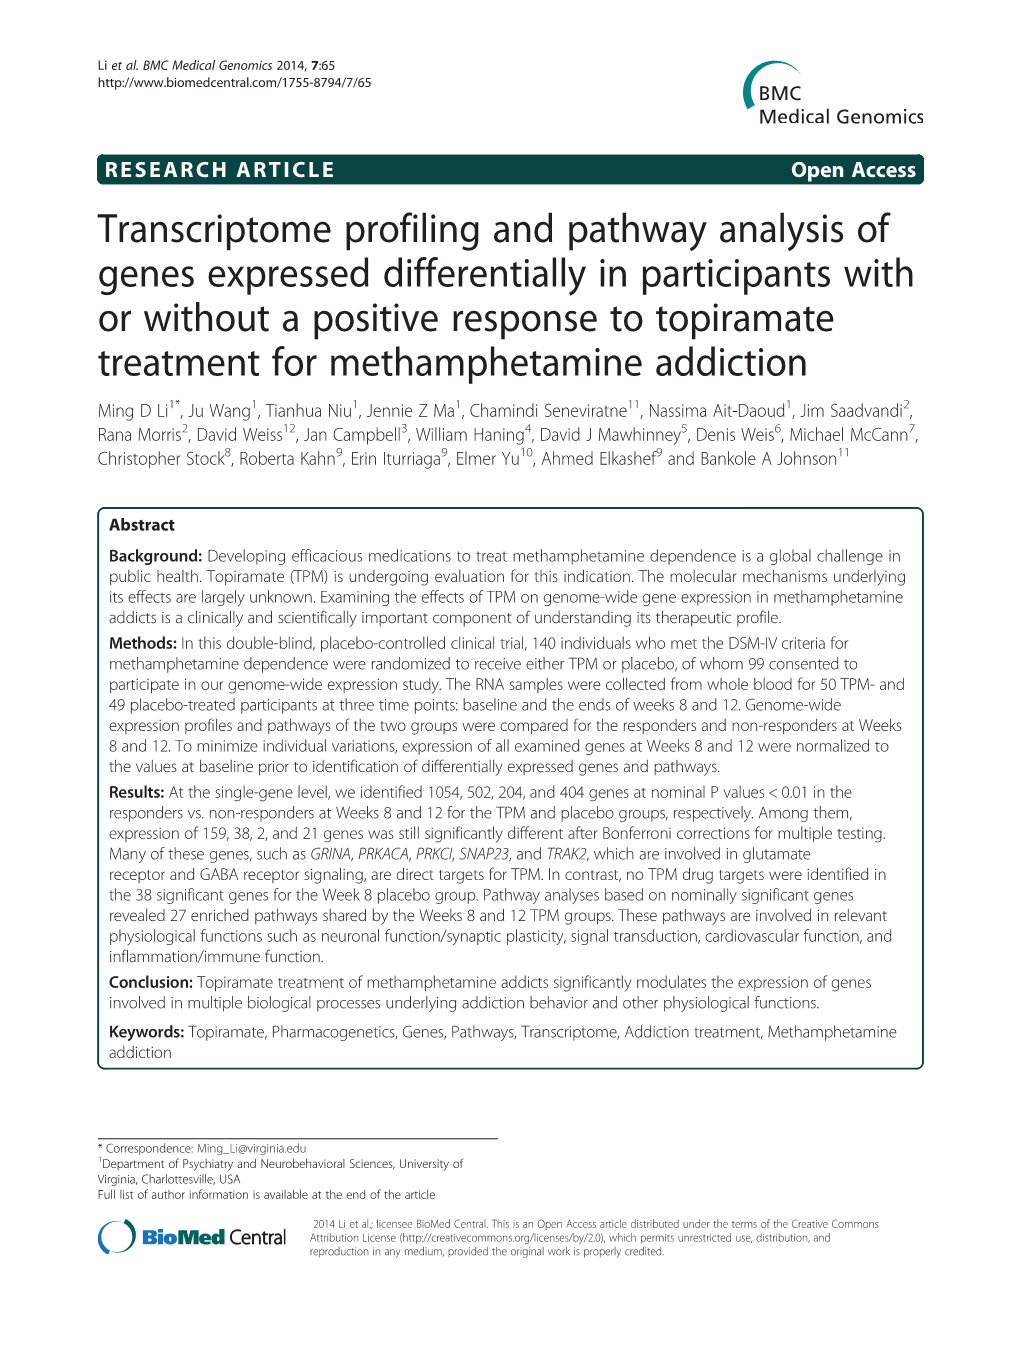 Transcriptome Profiling and Pathway Analysis of Genes Expressed